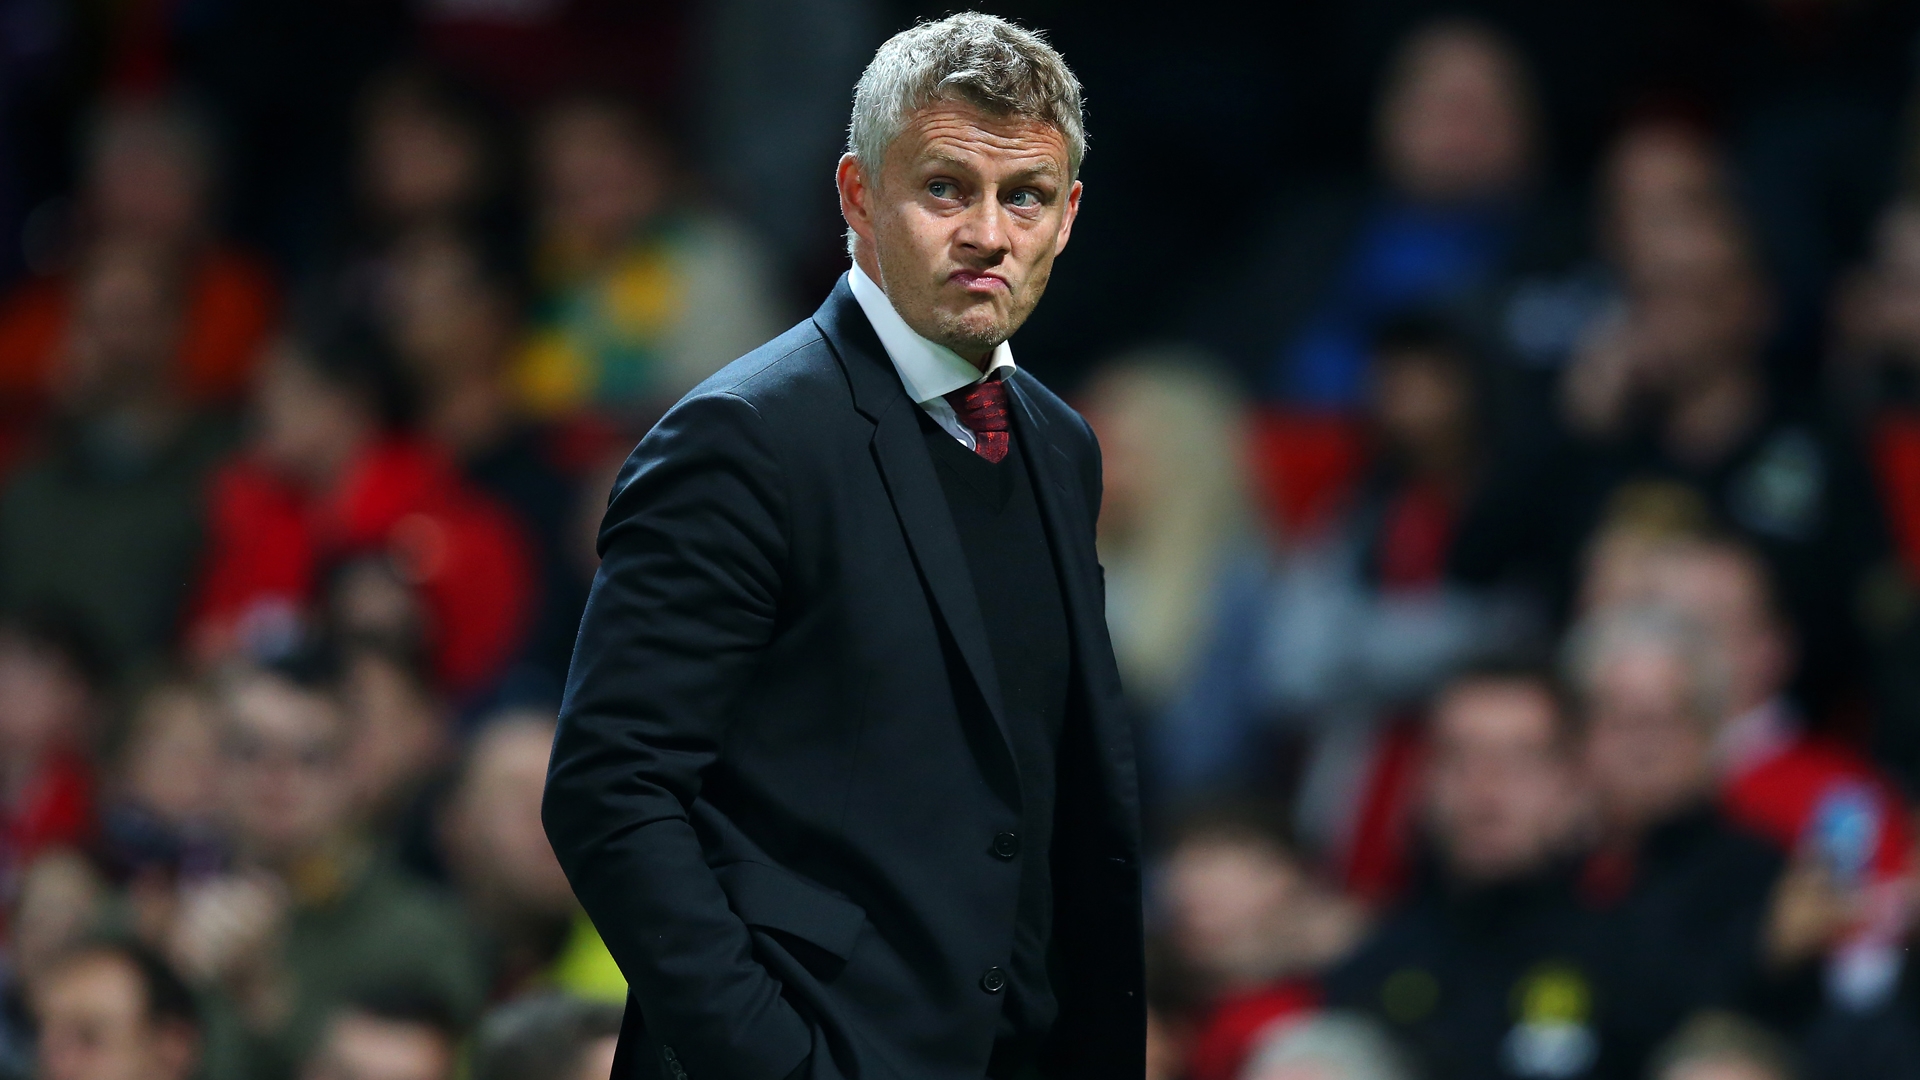 Man Utd to stick with Solskjaer even if they miss out on top six